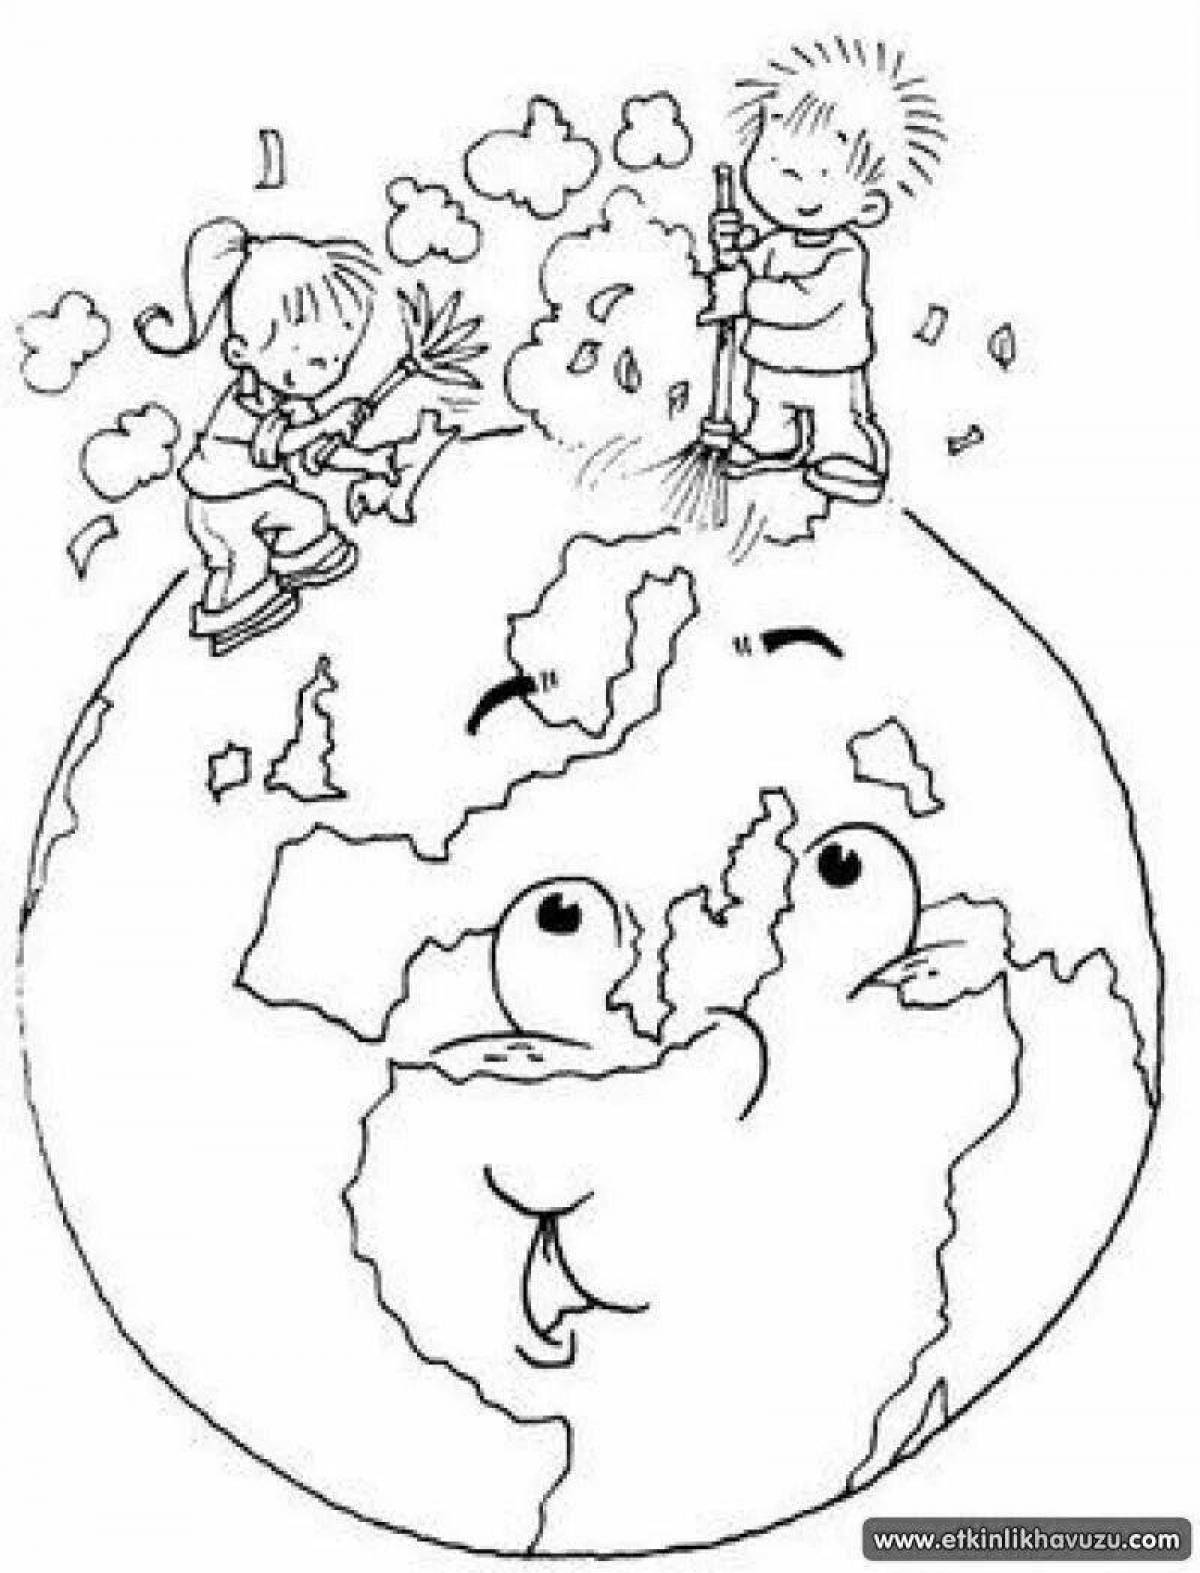 Coloring page hope for world peace